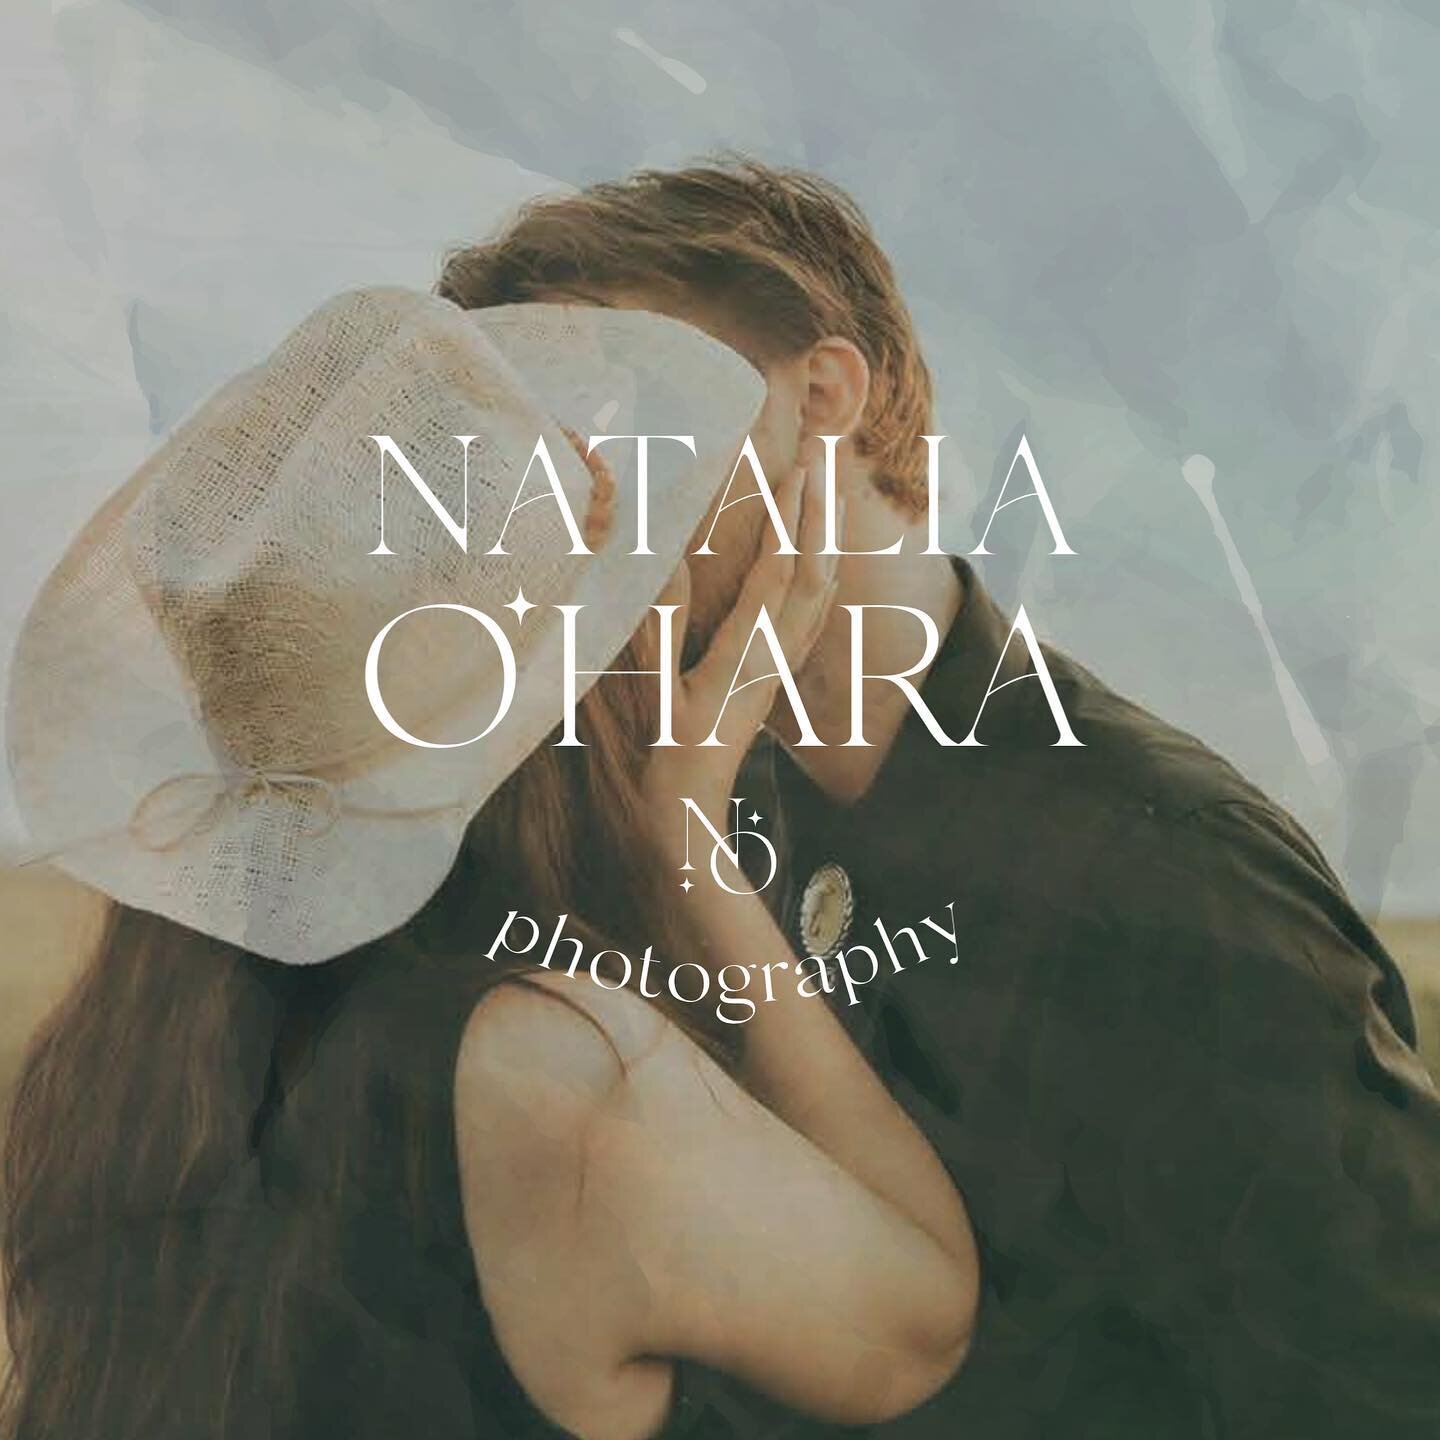 Here&rsquo;s a little sneak peek of what&rsquo;s to come this year 🤍 There&rsquo;s going to be a whole lot of NEW coming this year for Natalia O&rsquo;Hara Photography &amp; I couldn&rsquo;t be more excited/proud of what I&rsquo;ve been working on w